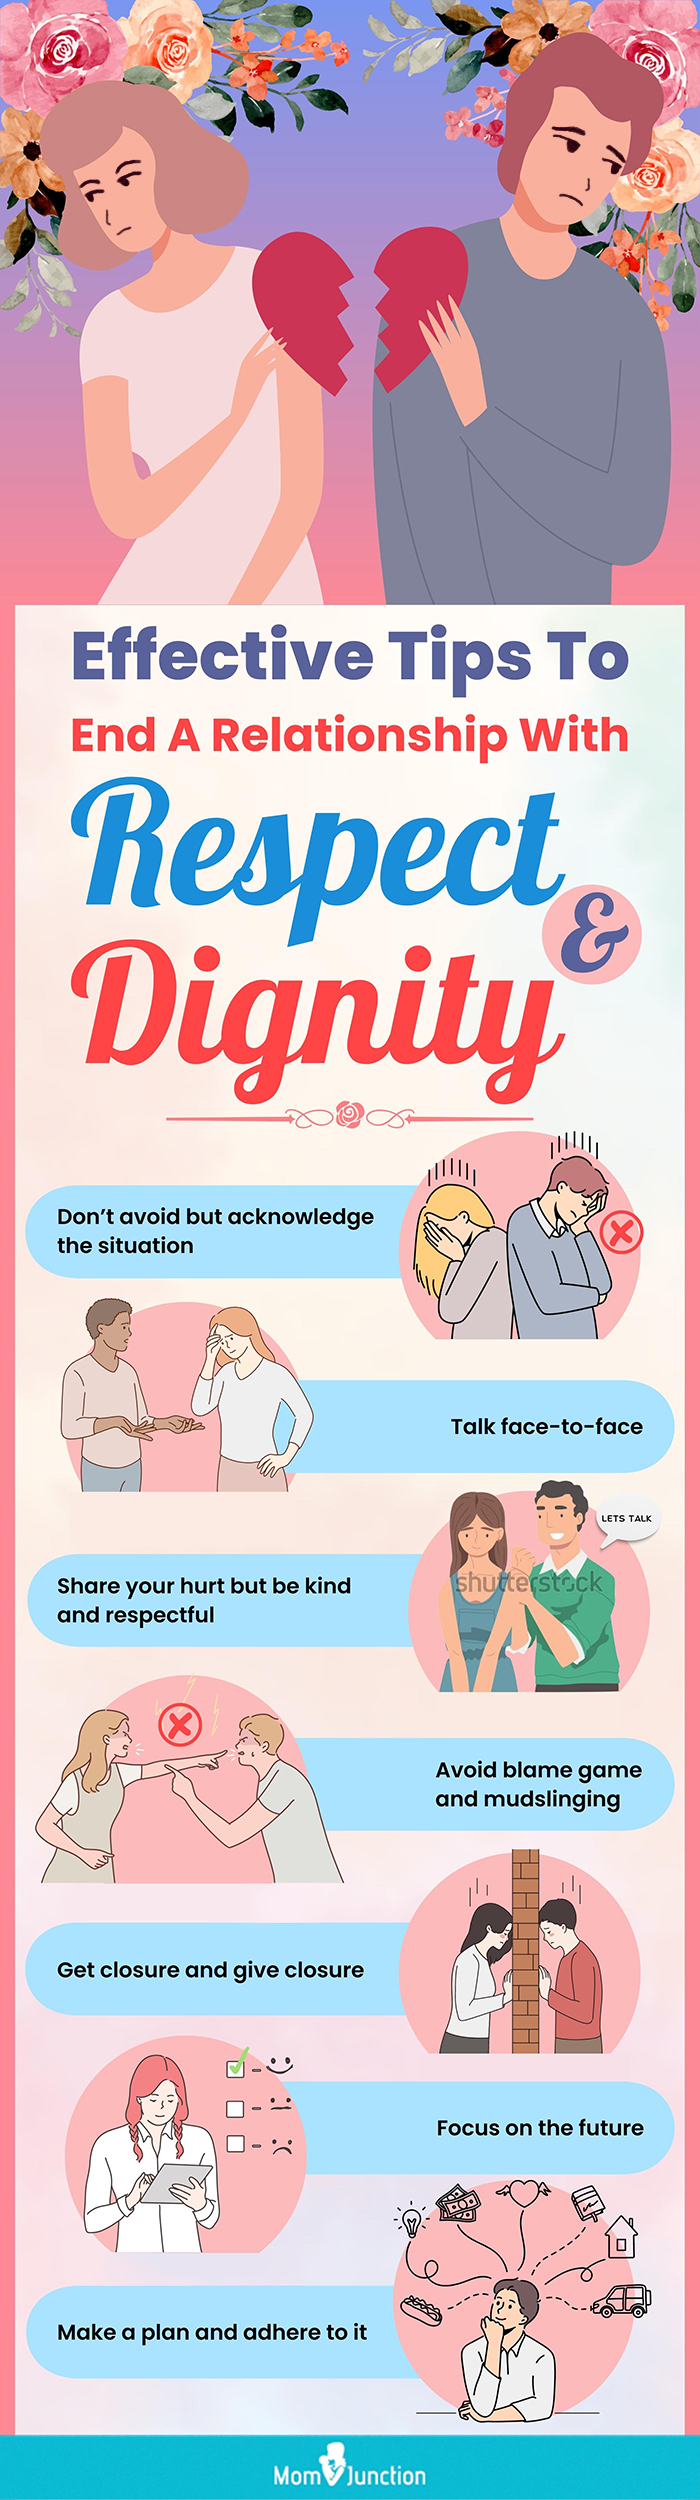 tips to end a relationship with respect and dignity (infographic)